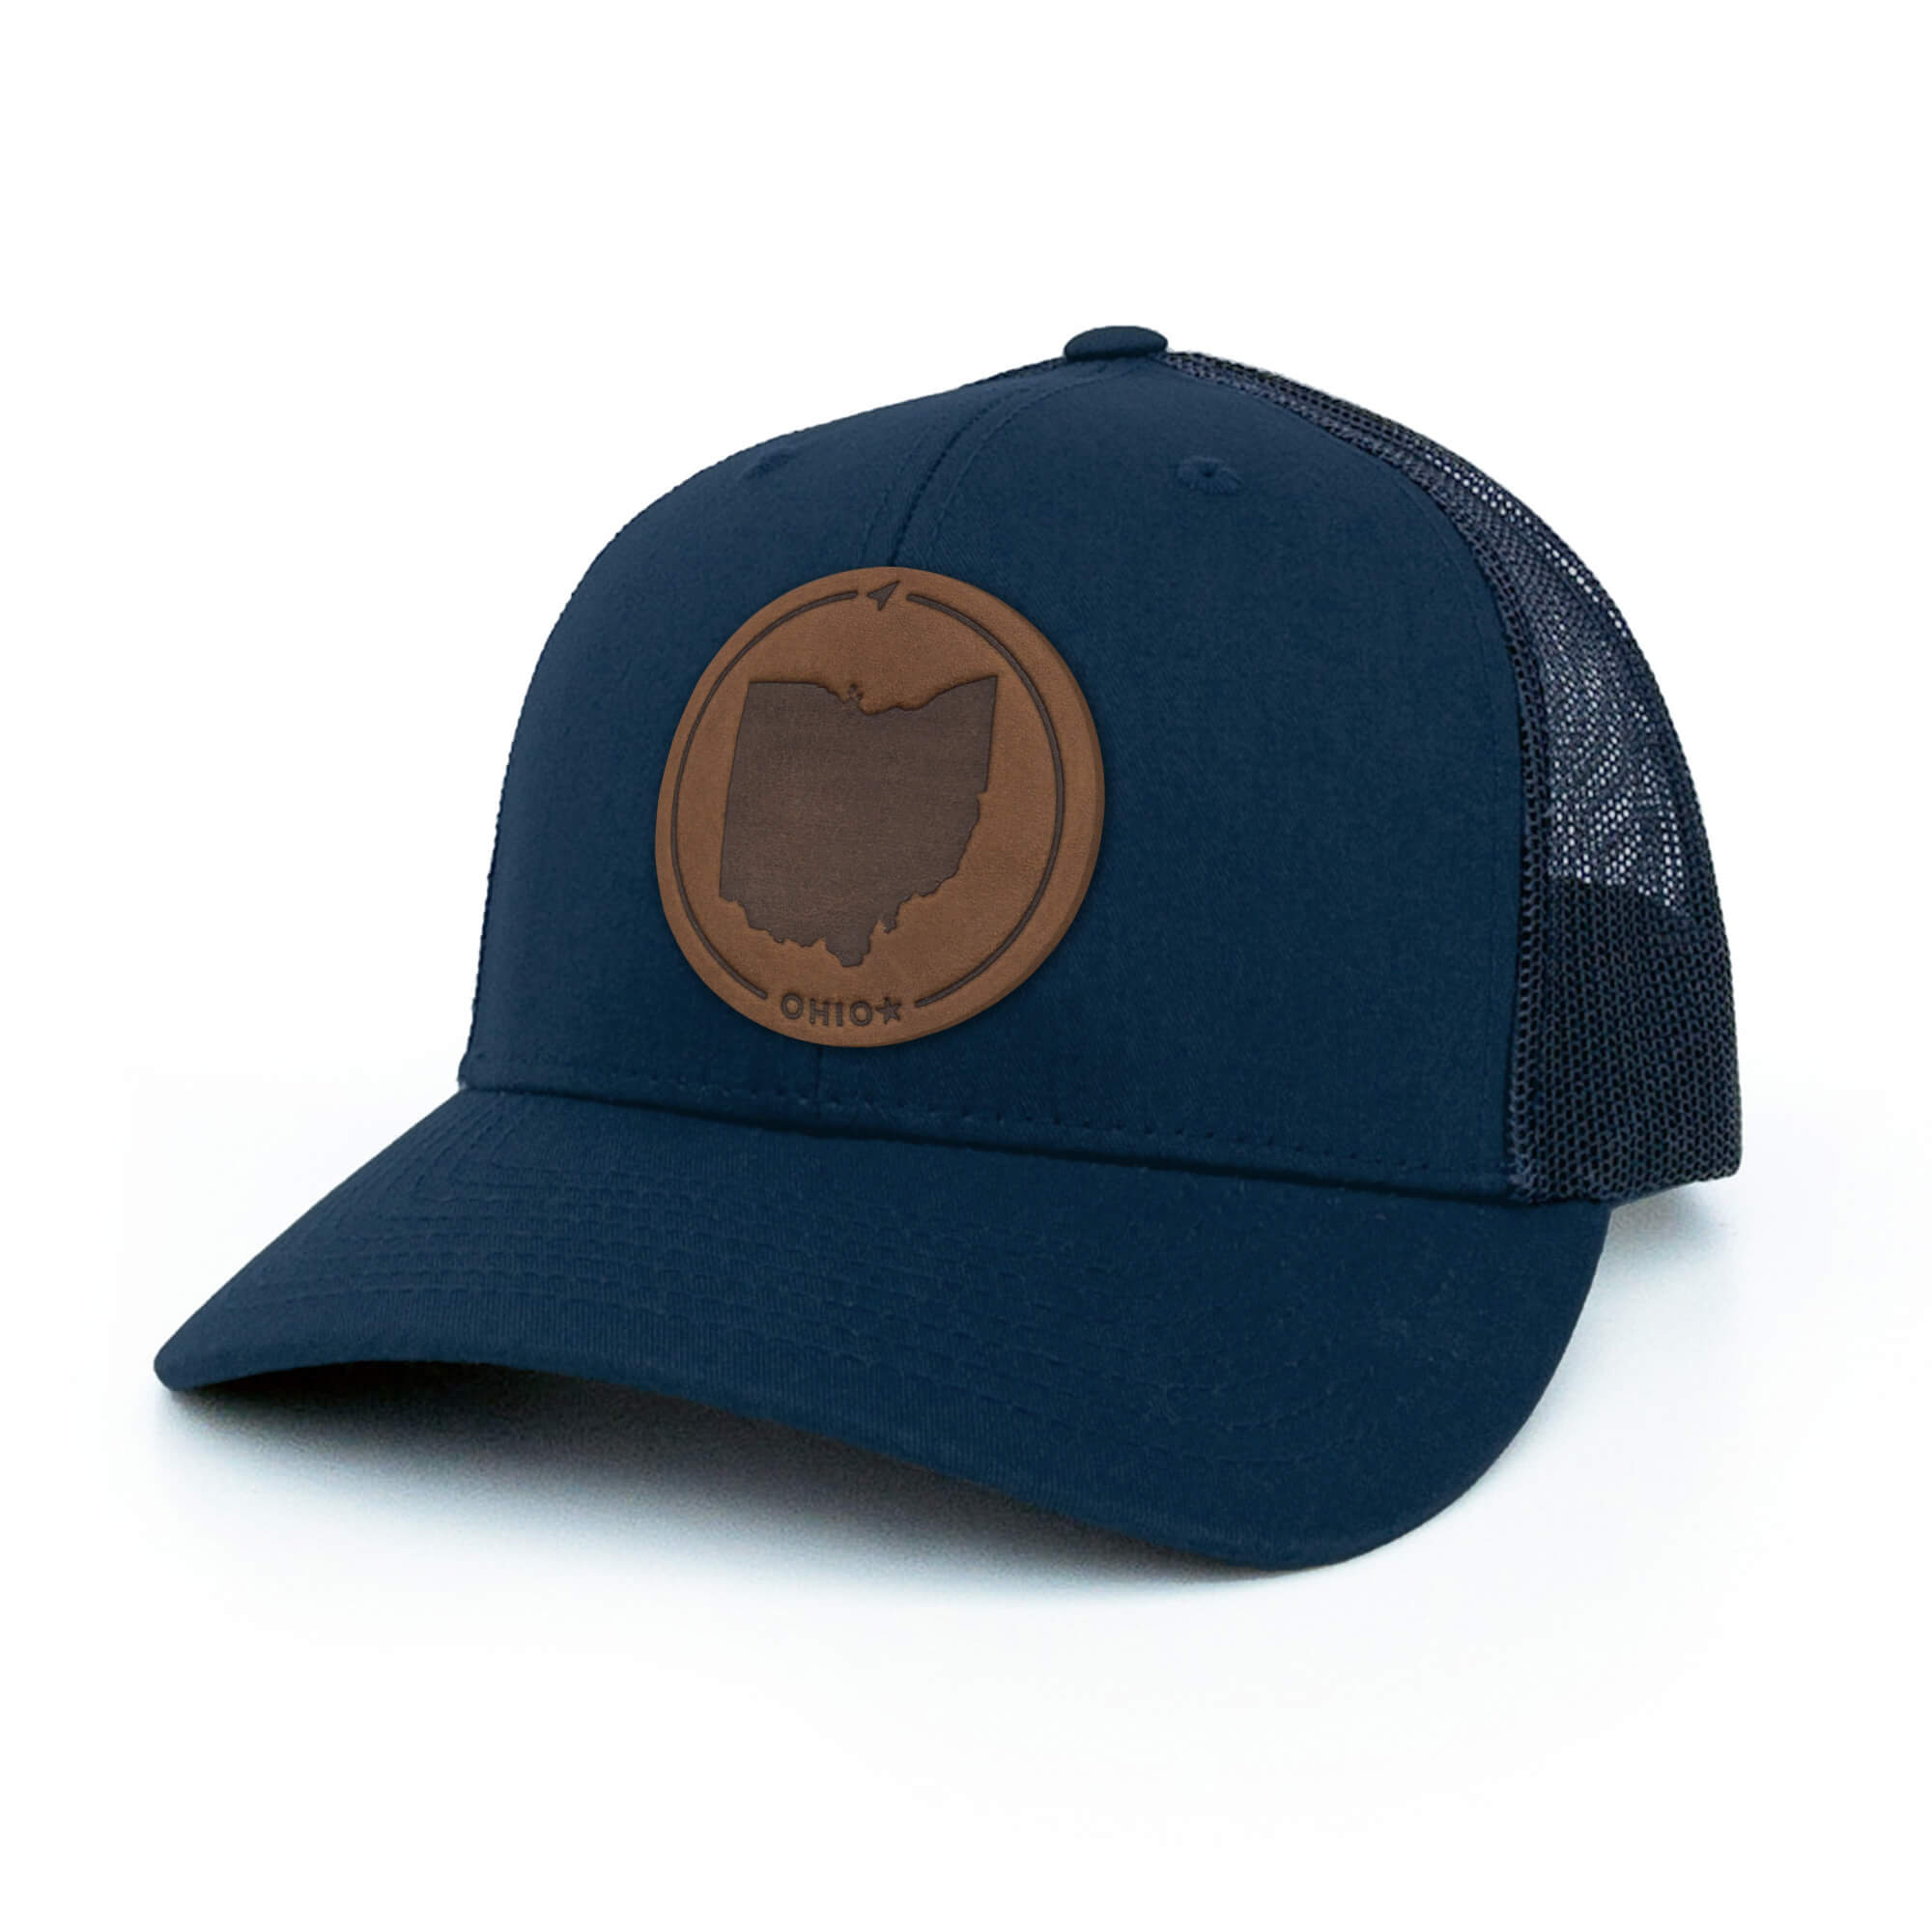 Navy trucker hat with full-grain leather patch of Ohio | BLACK-003-004, CHARC-003-004, NAVY-003-004, HGREY-003-004, MOSS-003-004, BROWN-003-004